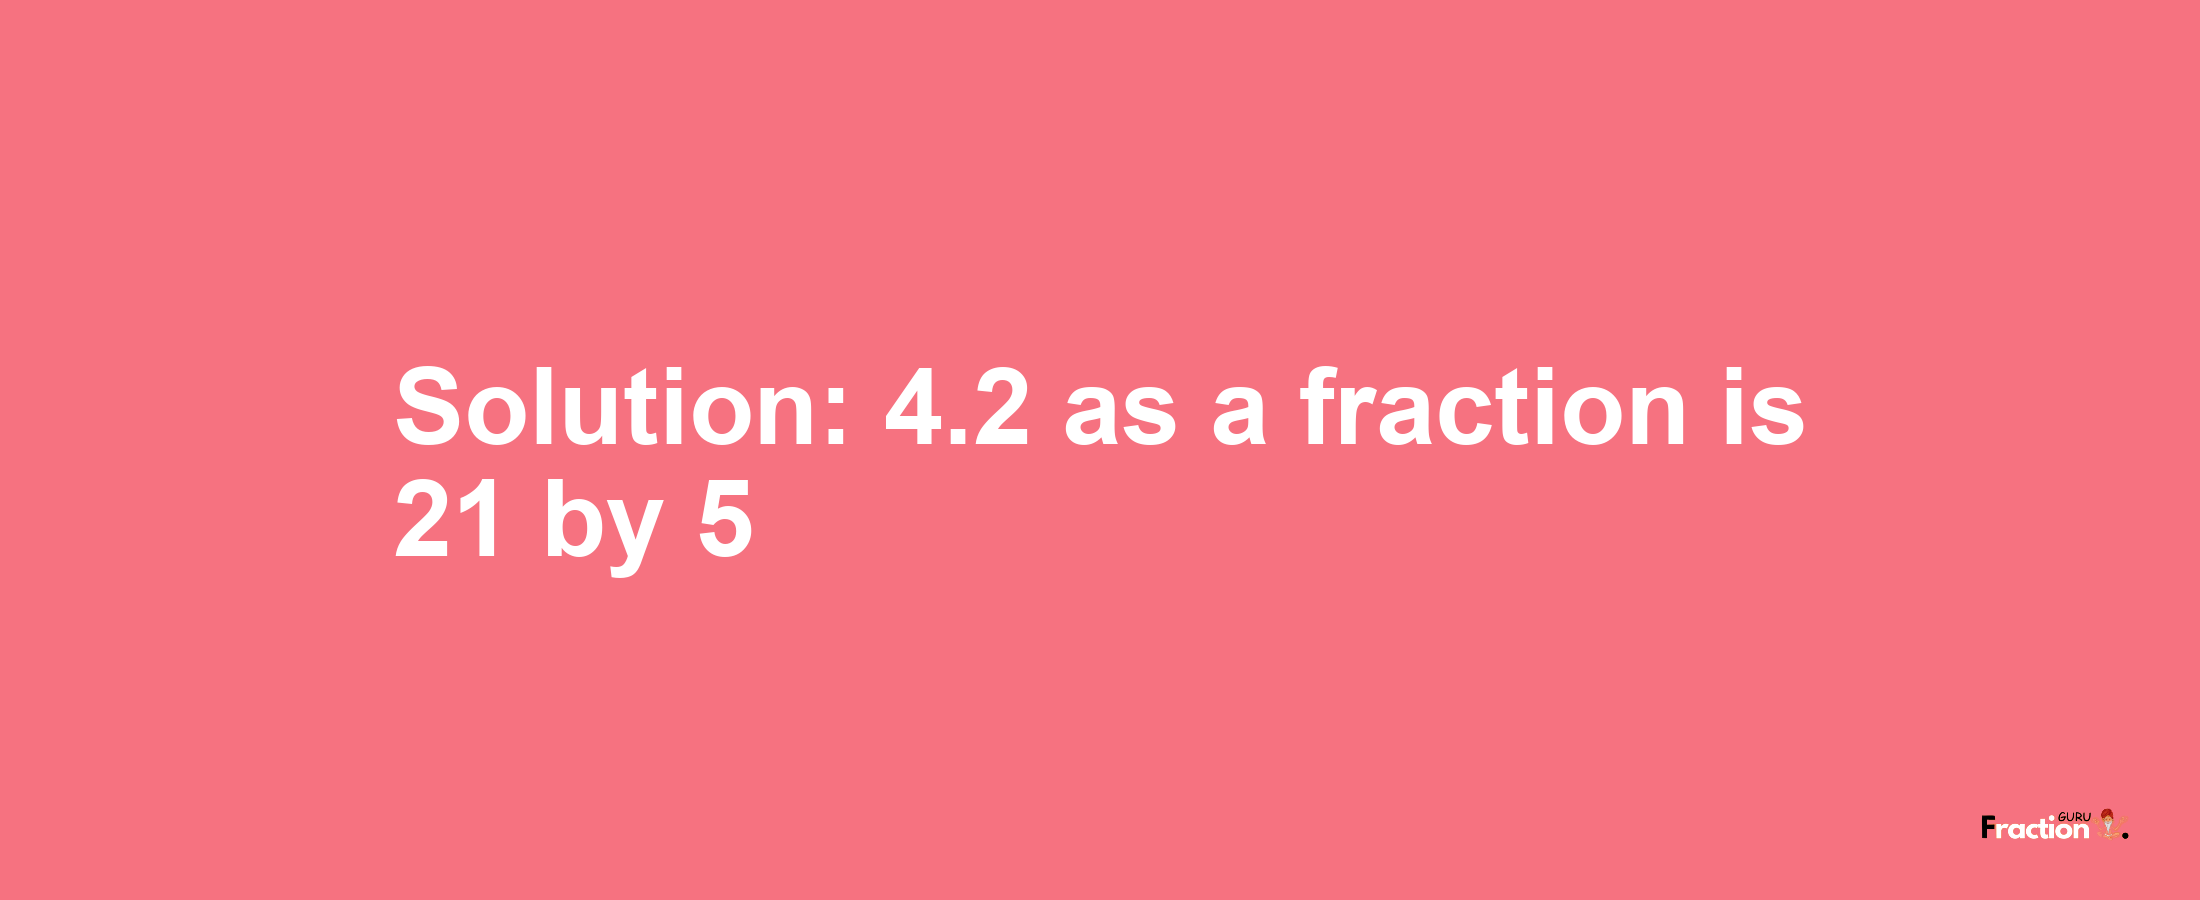 Solution:4.2 as a fraction is 21/5